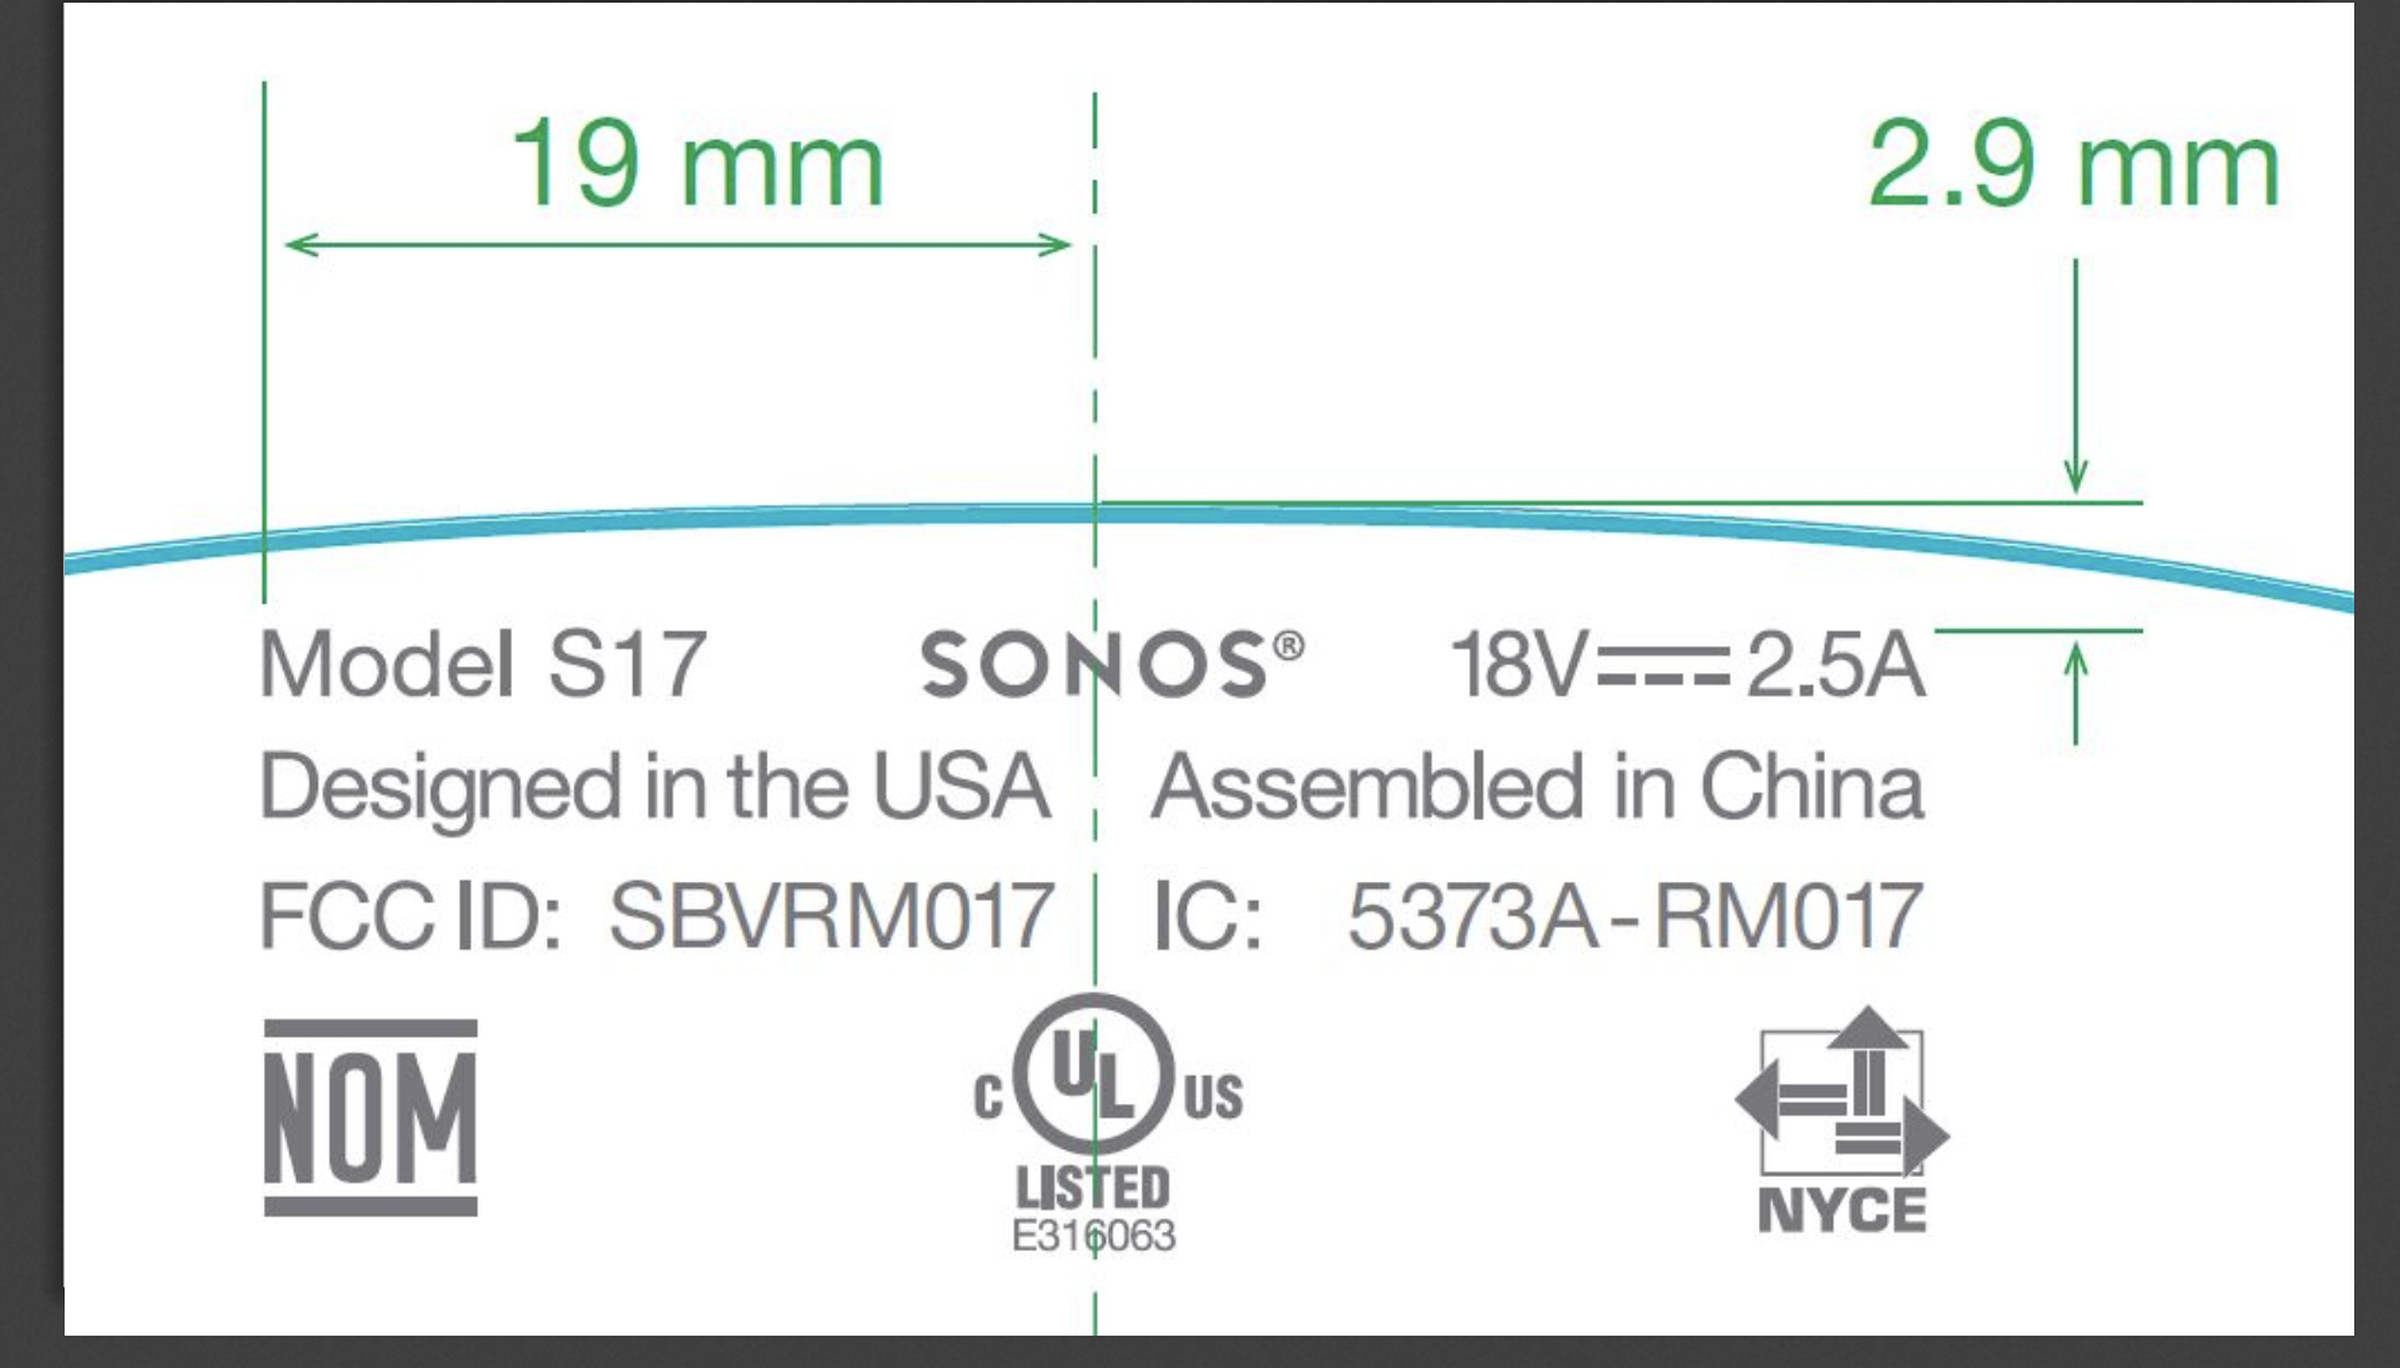 A label for the Sonos Bluetooth speaker was included in a recent FCC filing.